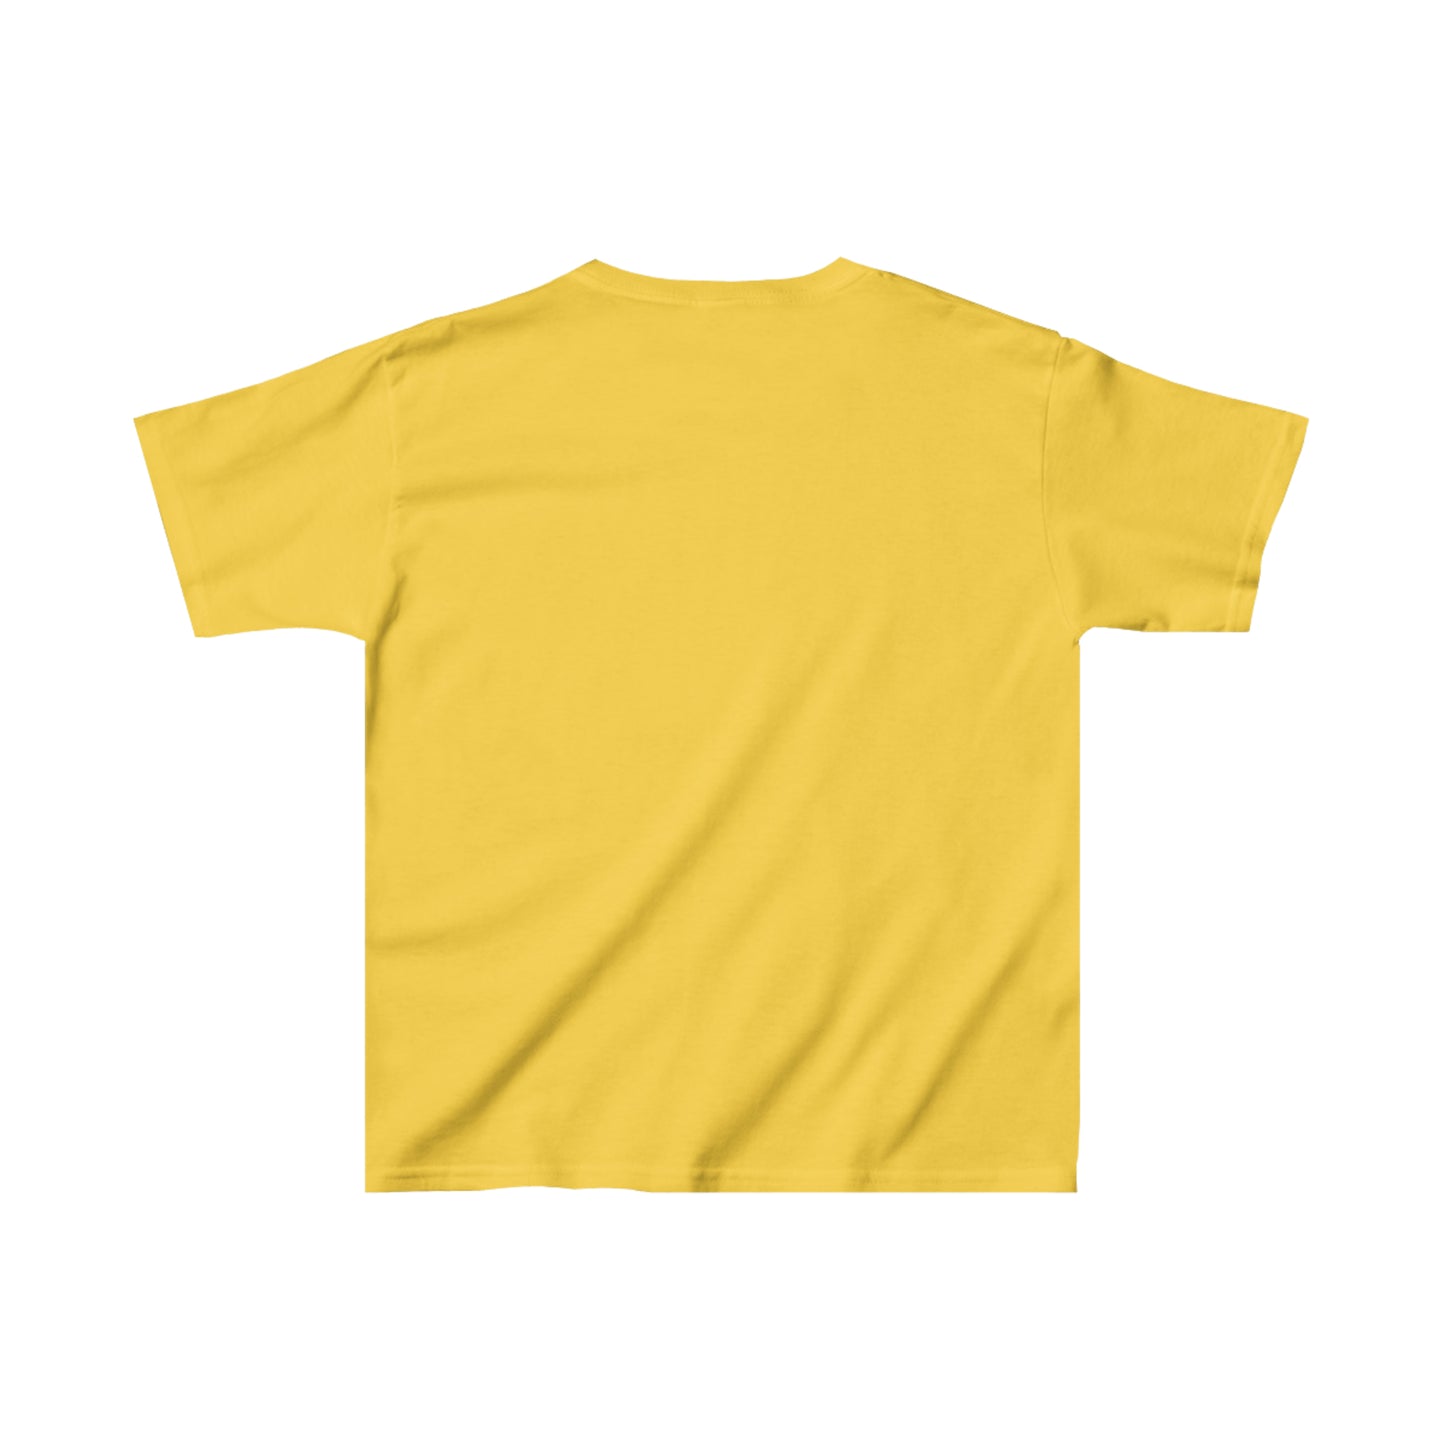 Small cookie - Kids Heavy Cotton™ Tee